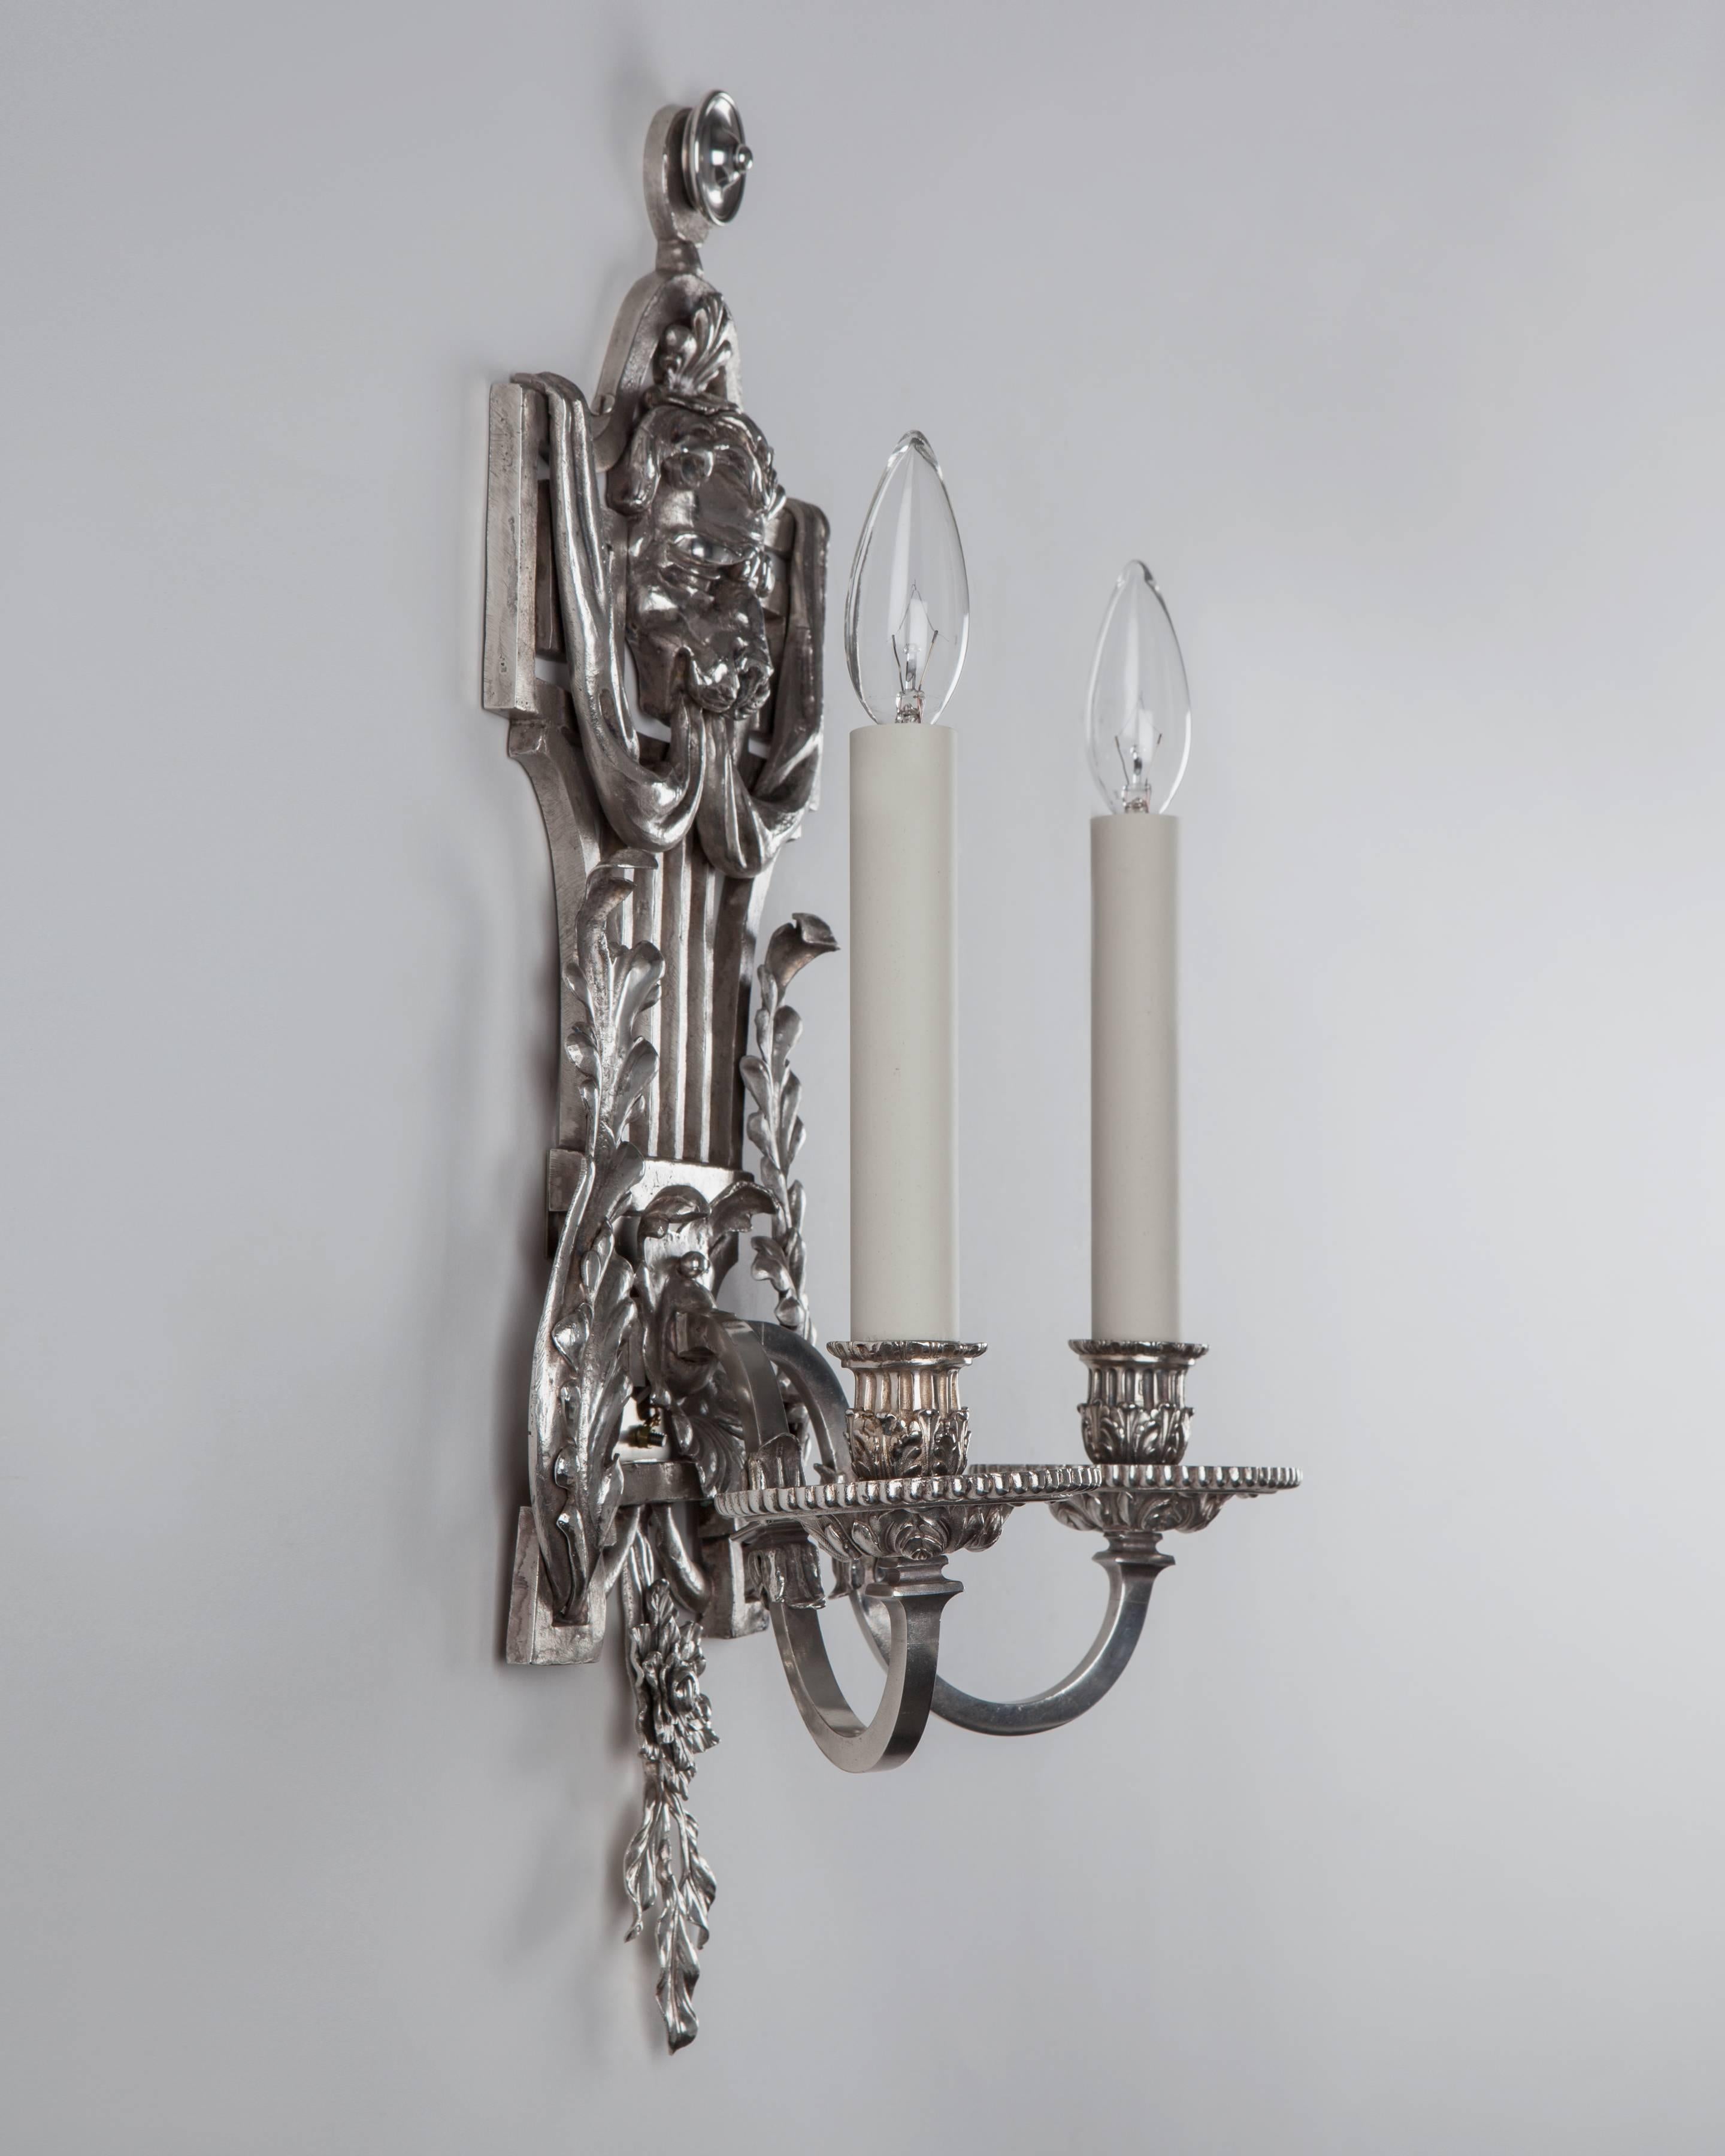 AIS3019
A pair of two arm lyre-back sconces in a worn silver plate finish. Square-section arms spring from openwork back plates detailed with foliate patterns crowned with a lion's head relief. Attributed to the New York maker E. F. Caldwell Co.